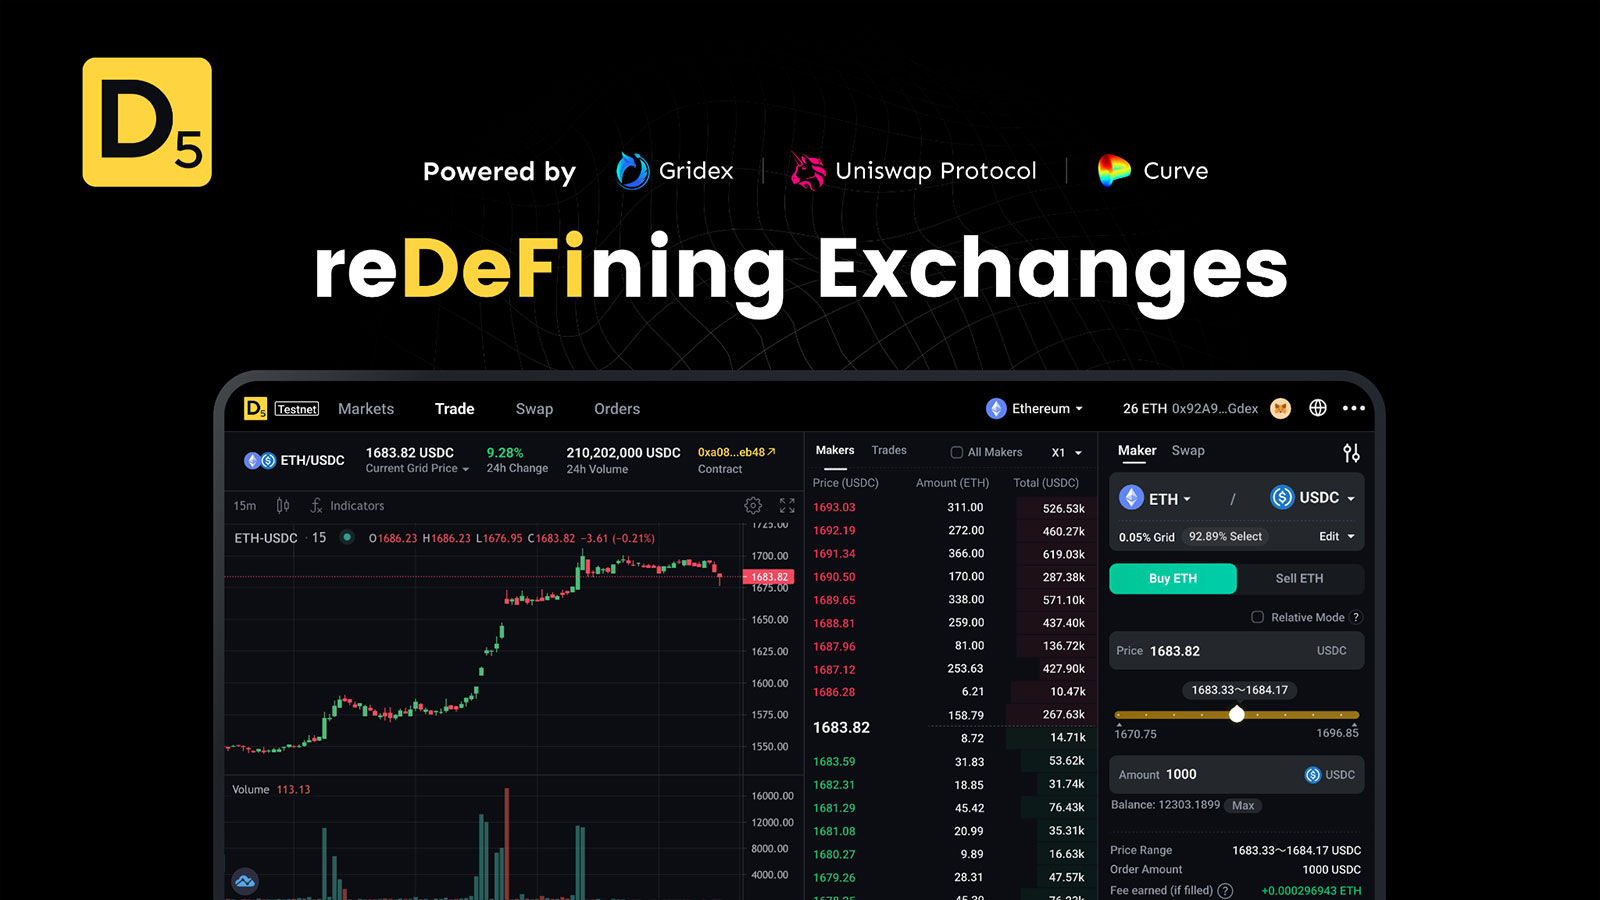 Introducing D5 Exchange: A Revolutionary On-chain Order Book DEX Built on Ethereum